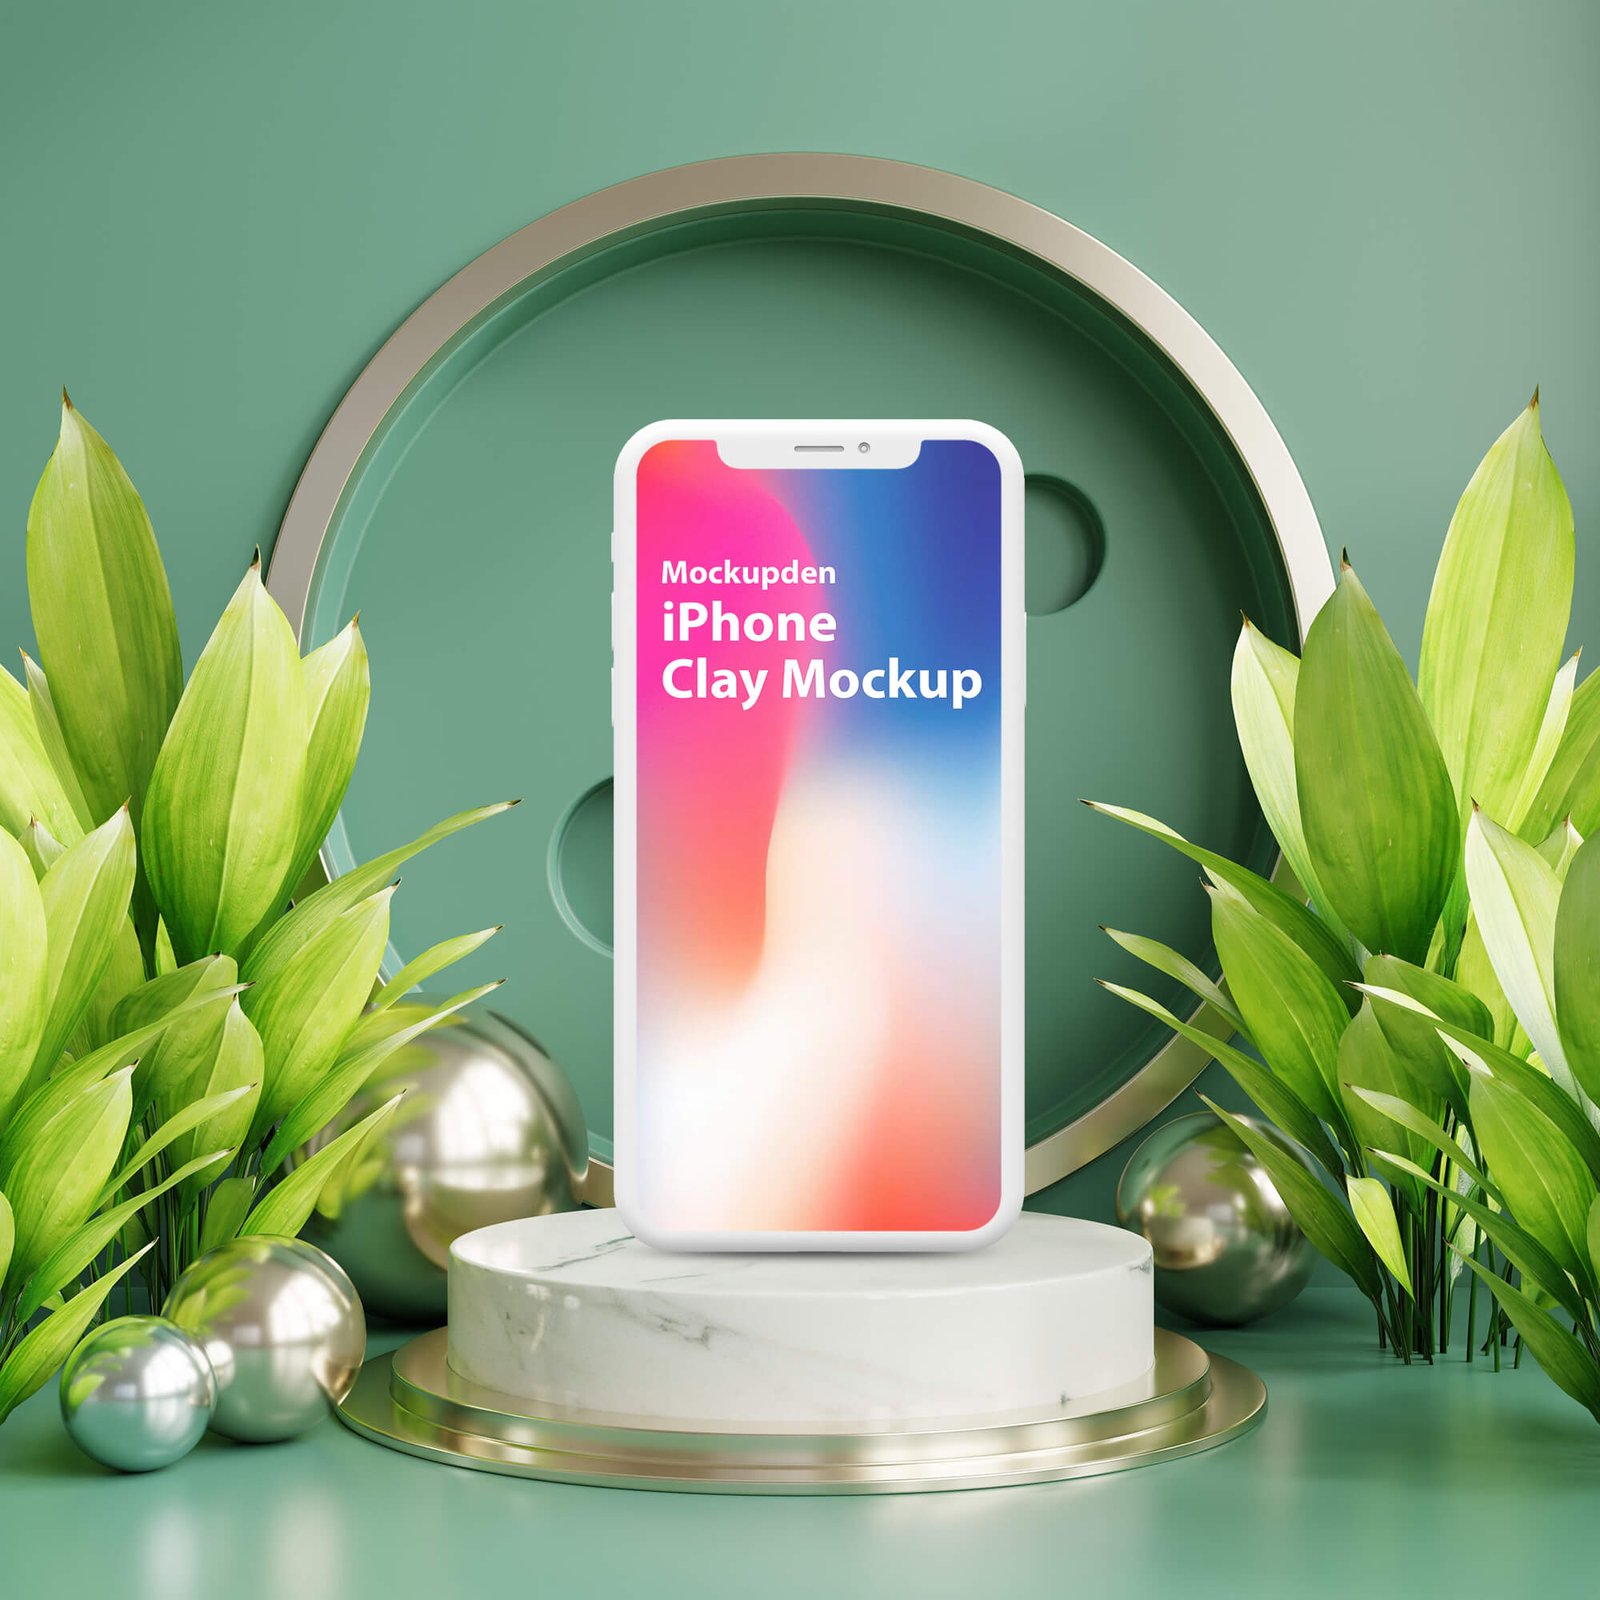 Free iPhone Clay Mockup PSD Template (1)